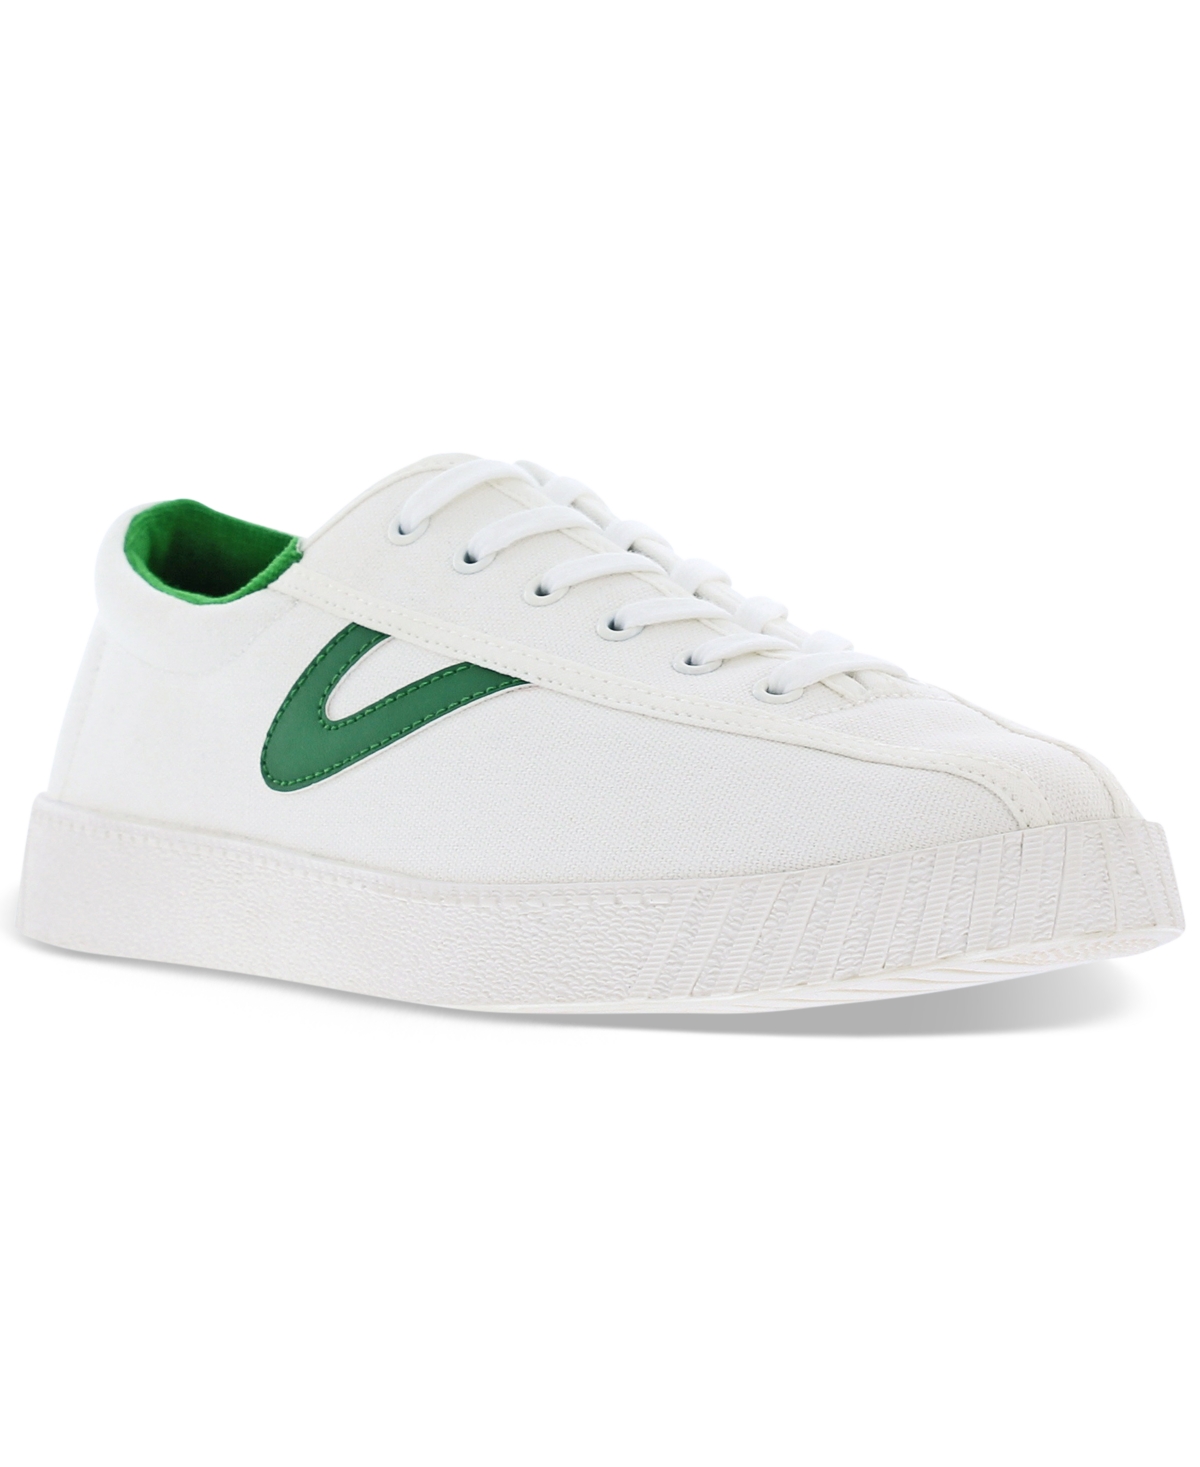 Shop Tretorn Men's Nylite Plus Canvas Casual Sneakers From Finish Line In White,green